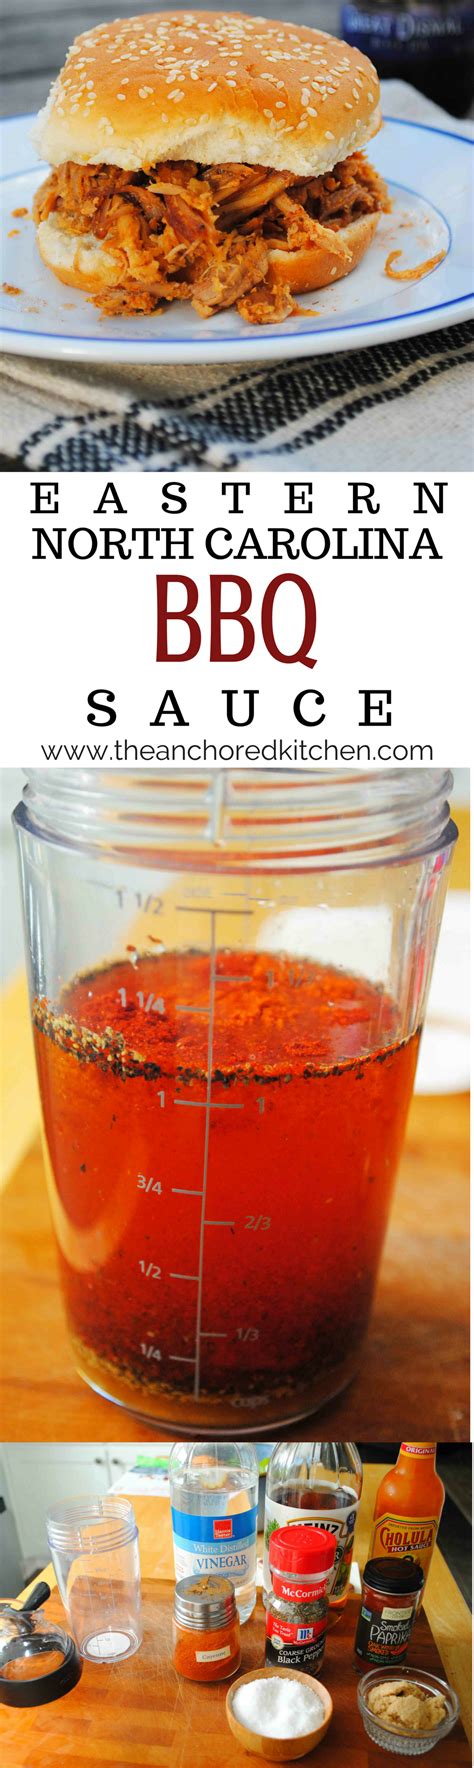 It is very wet, and is great on pulled or chopped pork. Eastern North Carolina BBQ Sauce - The Anchored Kitchen